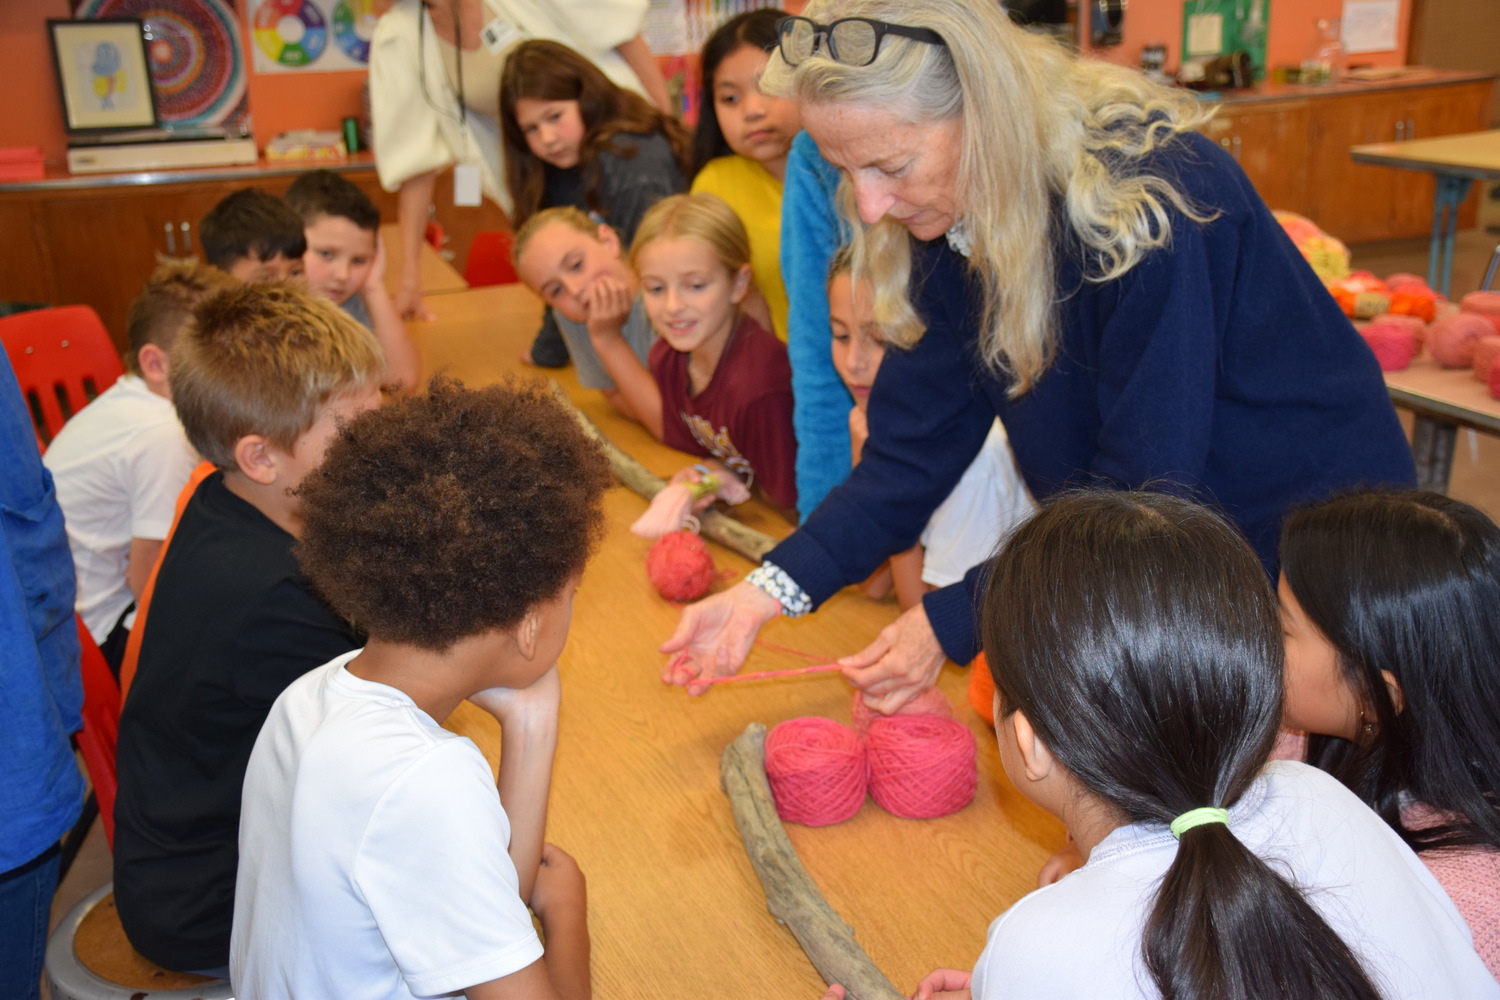 Westhampton Beach Elementary School students are working with artist Laurie Lambrecht to create an installation for the Guild Hall’s Student Art Festival. COURTESY WESTHAMPTON BEACH SCHOOL DISTRICT